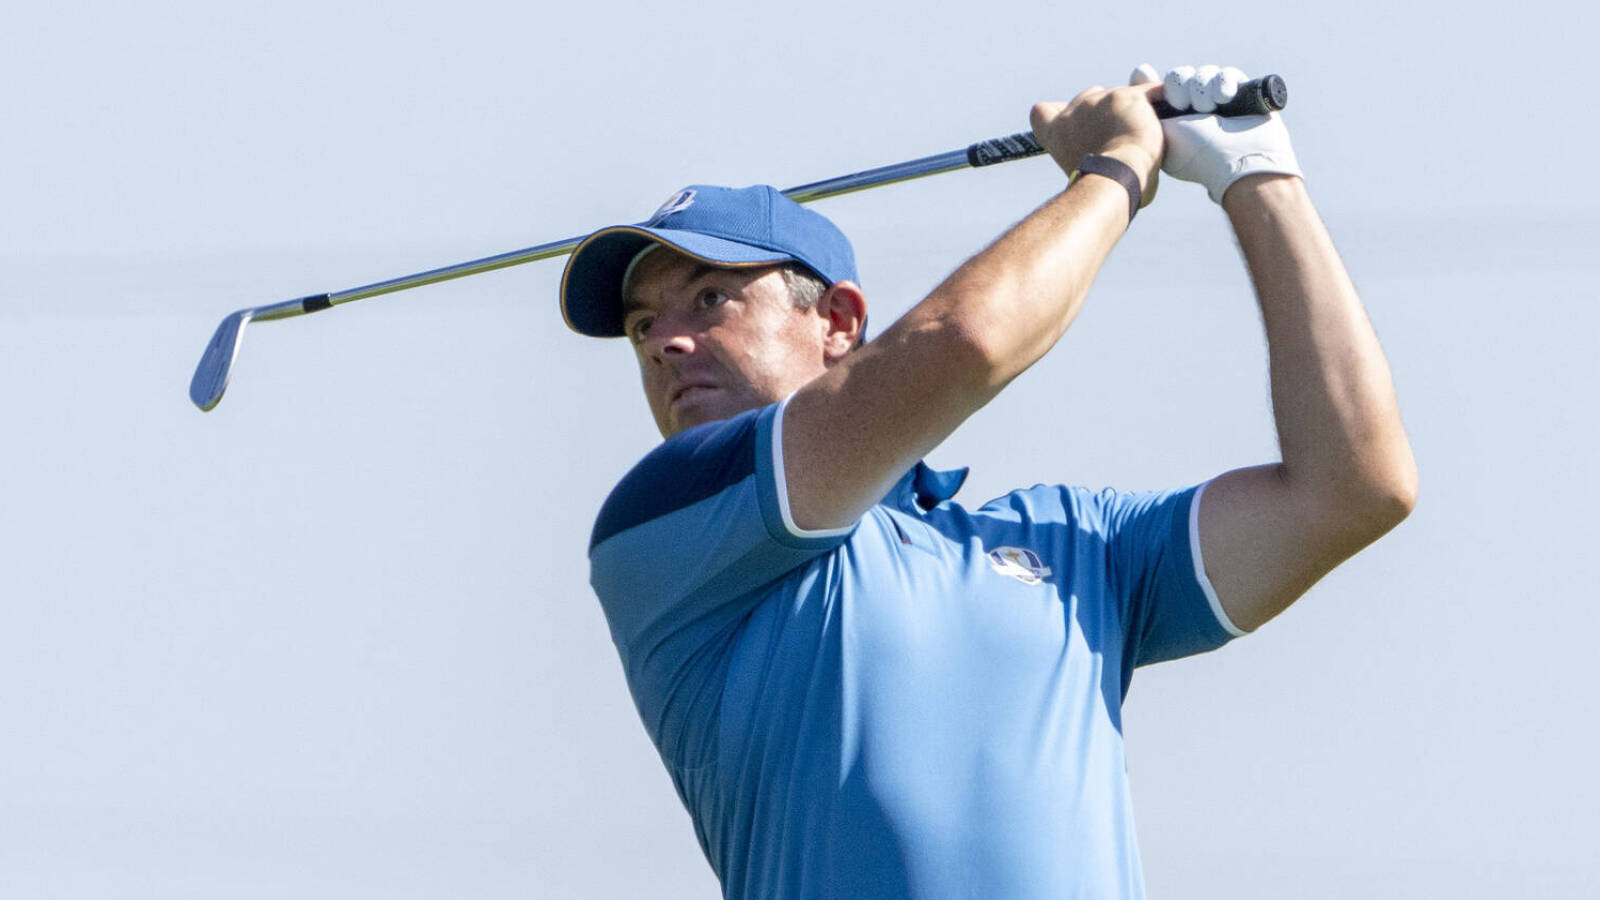 Ryder Cup: Rory McIlroy says Team Europe doesn't miss LIV golfers